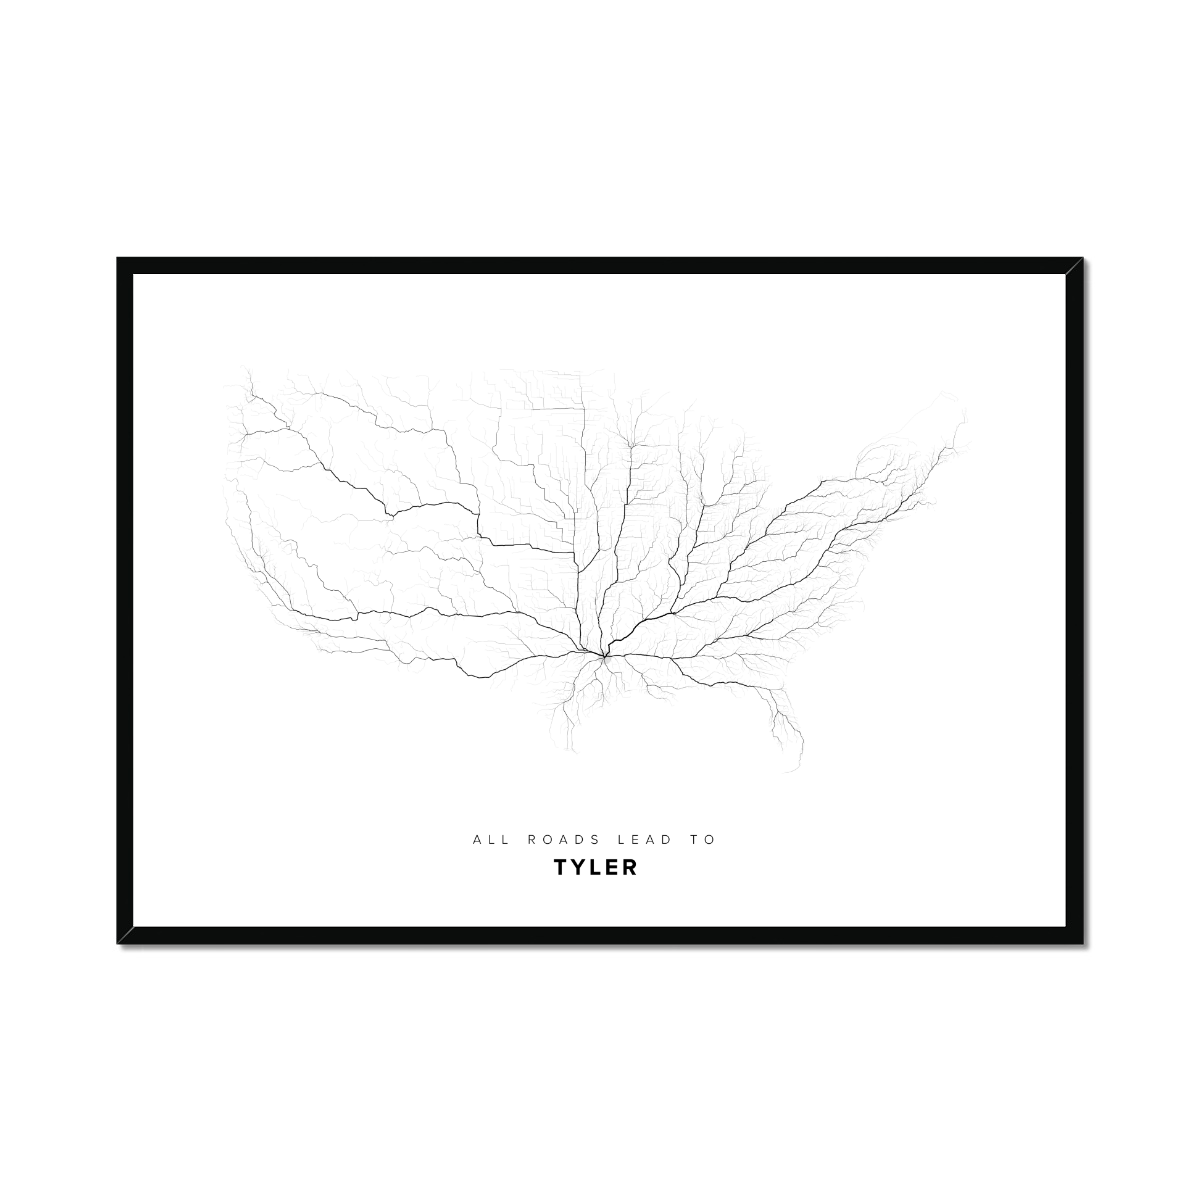 All roads lead to Tyler (United States of America) Fine Art Map Print